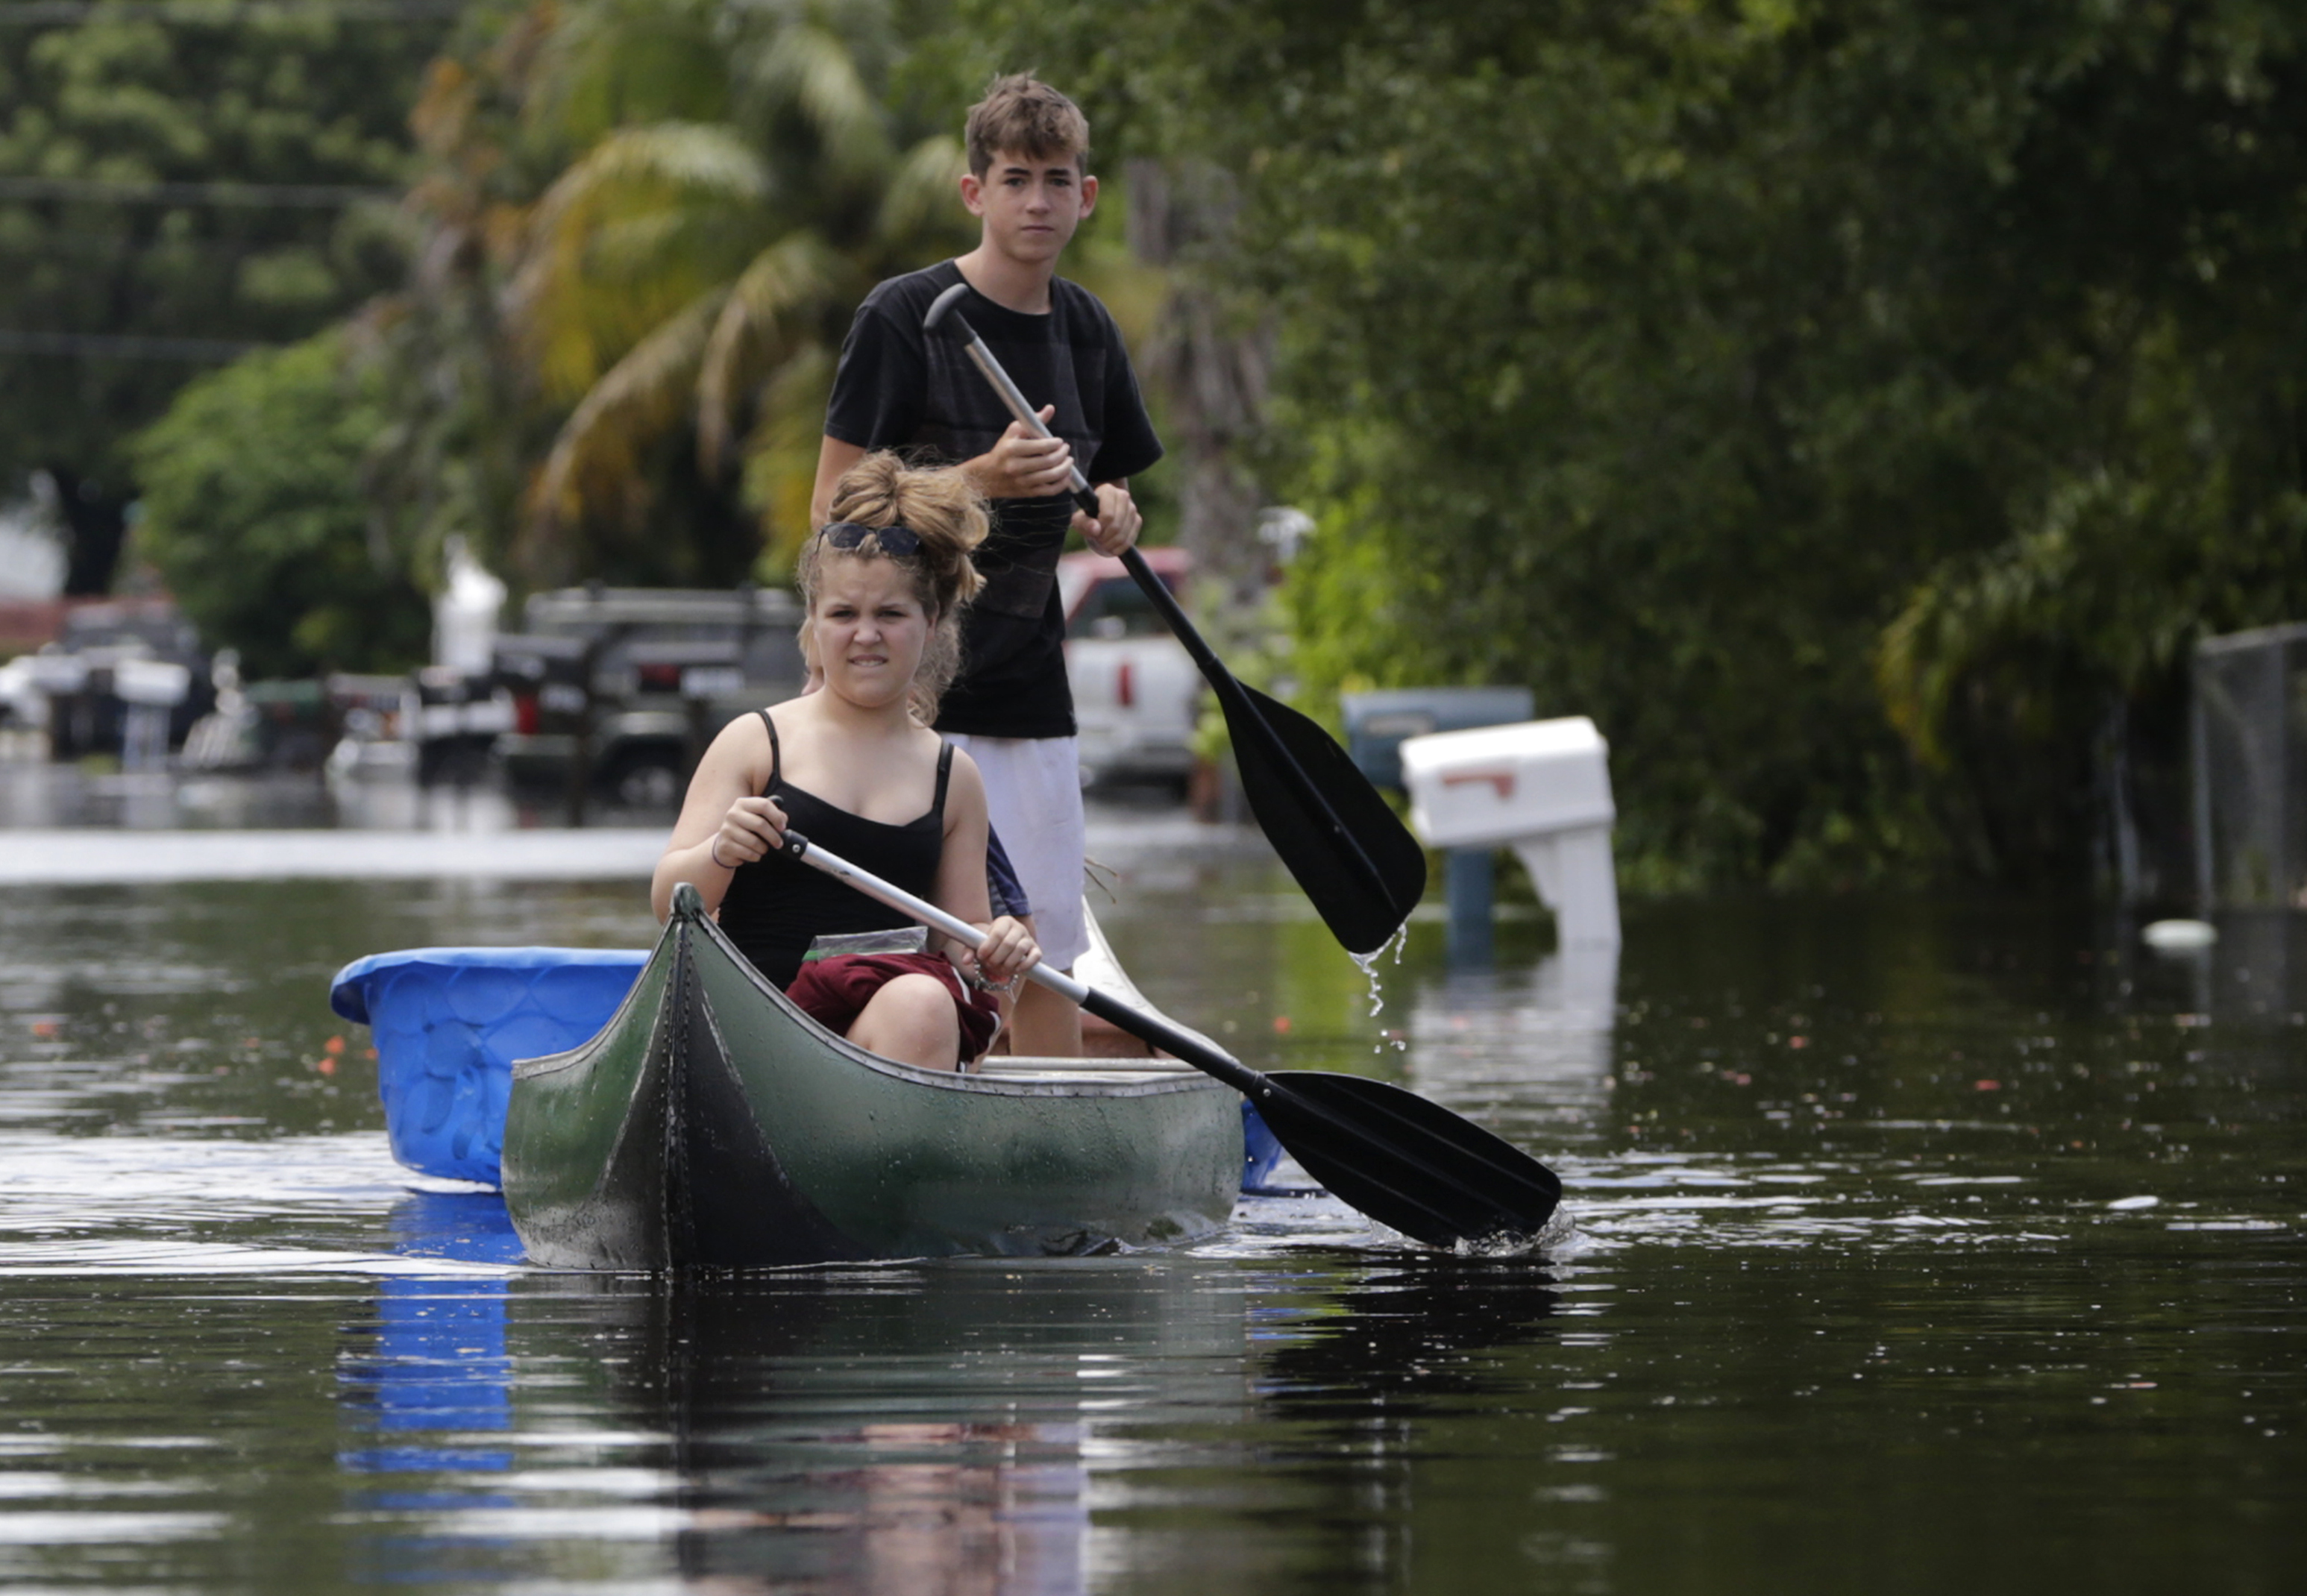 Isabella and Timothy, who did not want their last names used, navigate flooded streets following heavy rains, Wednesday, June 7, 2017, in Davie, Fla. Several South Florida cities set rainfall records as heavy rain continues to fall, bringing the potential for further flooding. Wallace put up the 